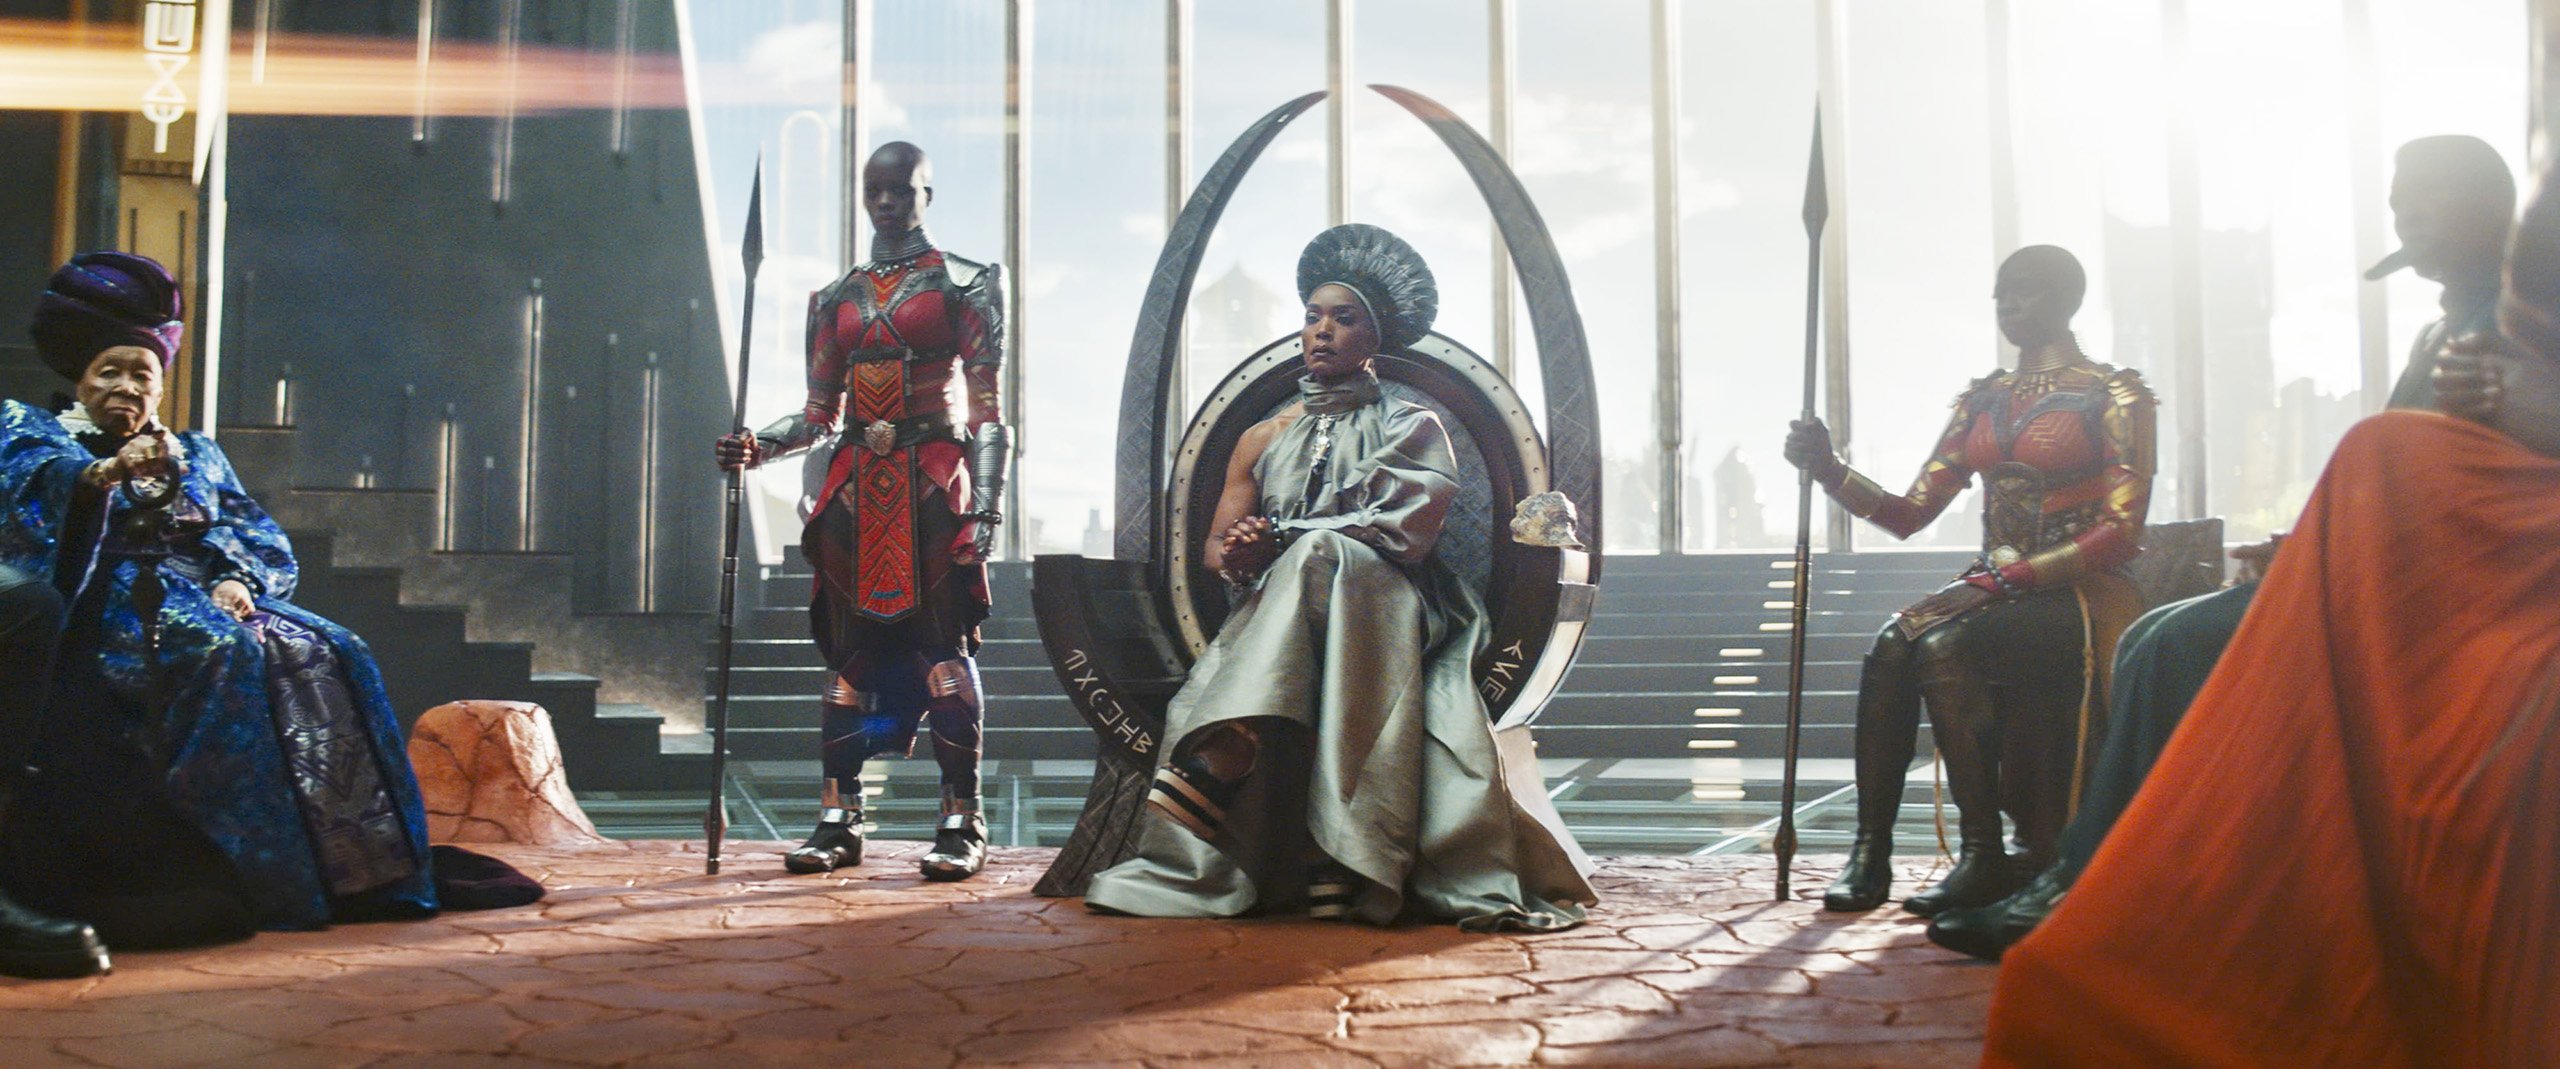 Meet The African Designers Whose Work Brought To Life The Fictional Kingdom In Black Panther